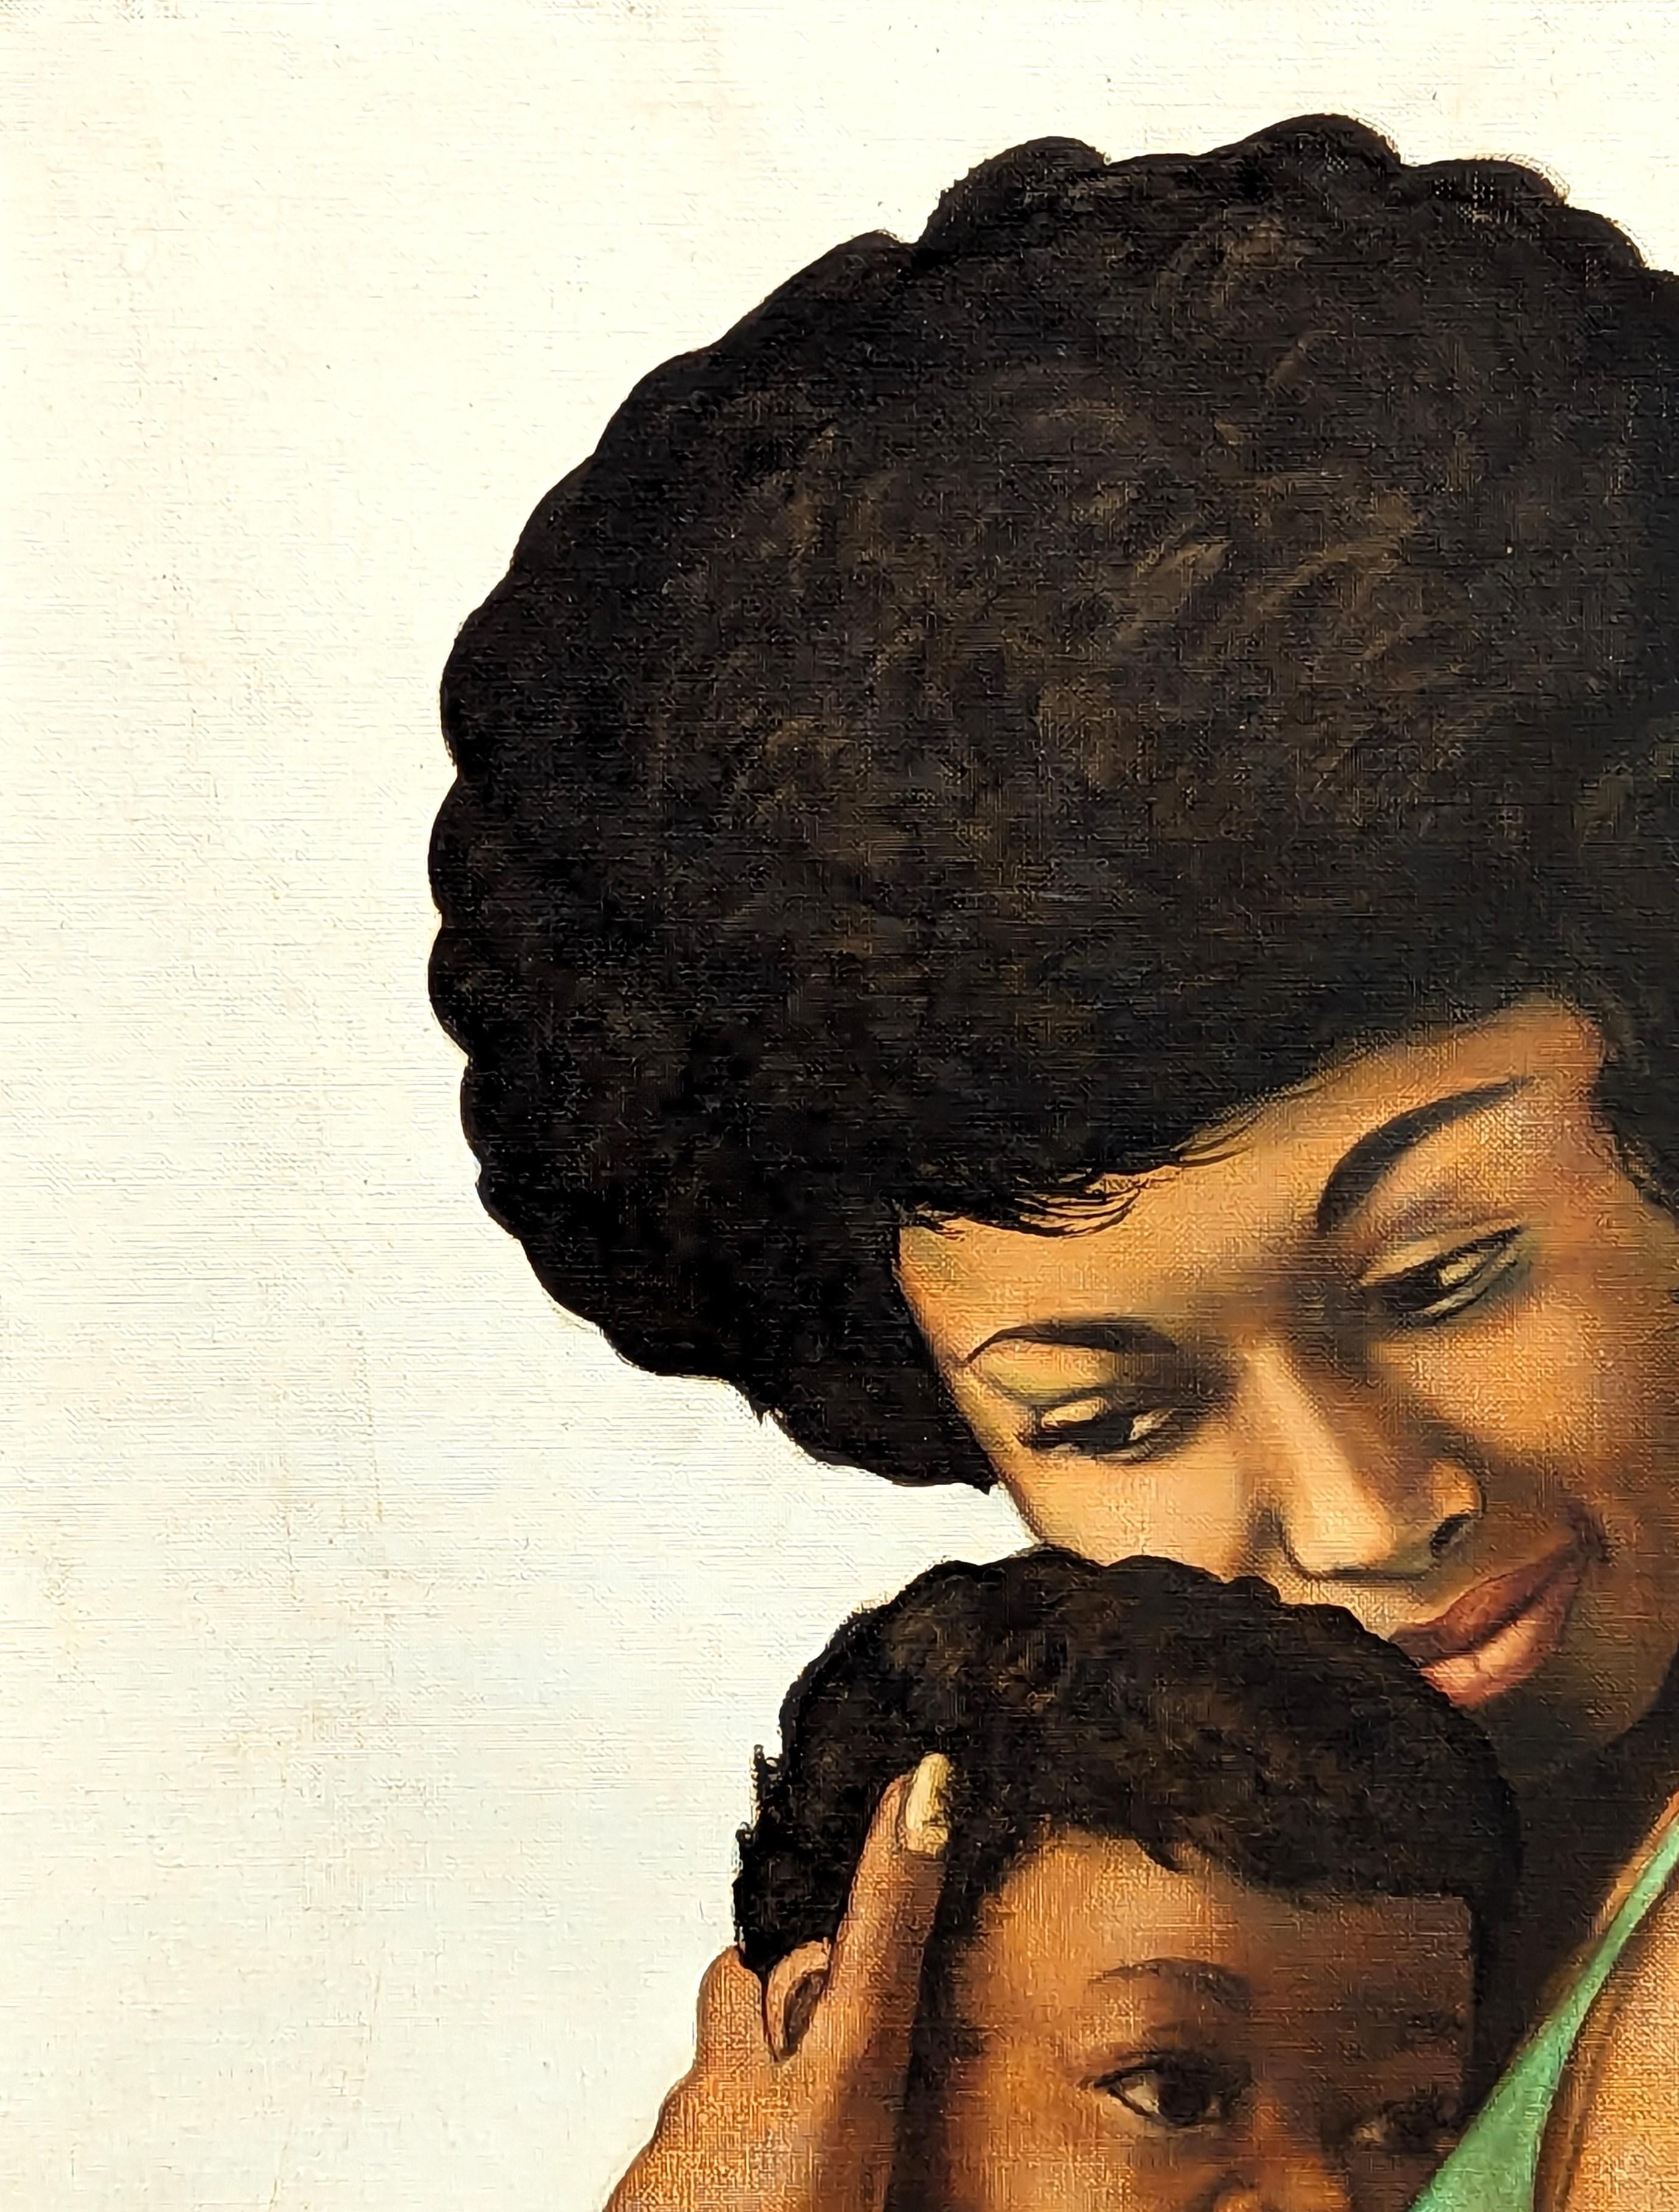 Early figurative portrait painting by Houston-based artist Buford Evans. The work features a black woman dressed in a green dress gingerly caressing her young child. Signed by the artist in the front lower right corner as well as signed, titled, and